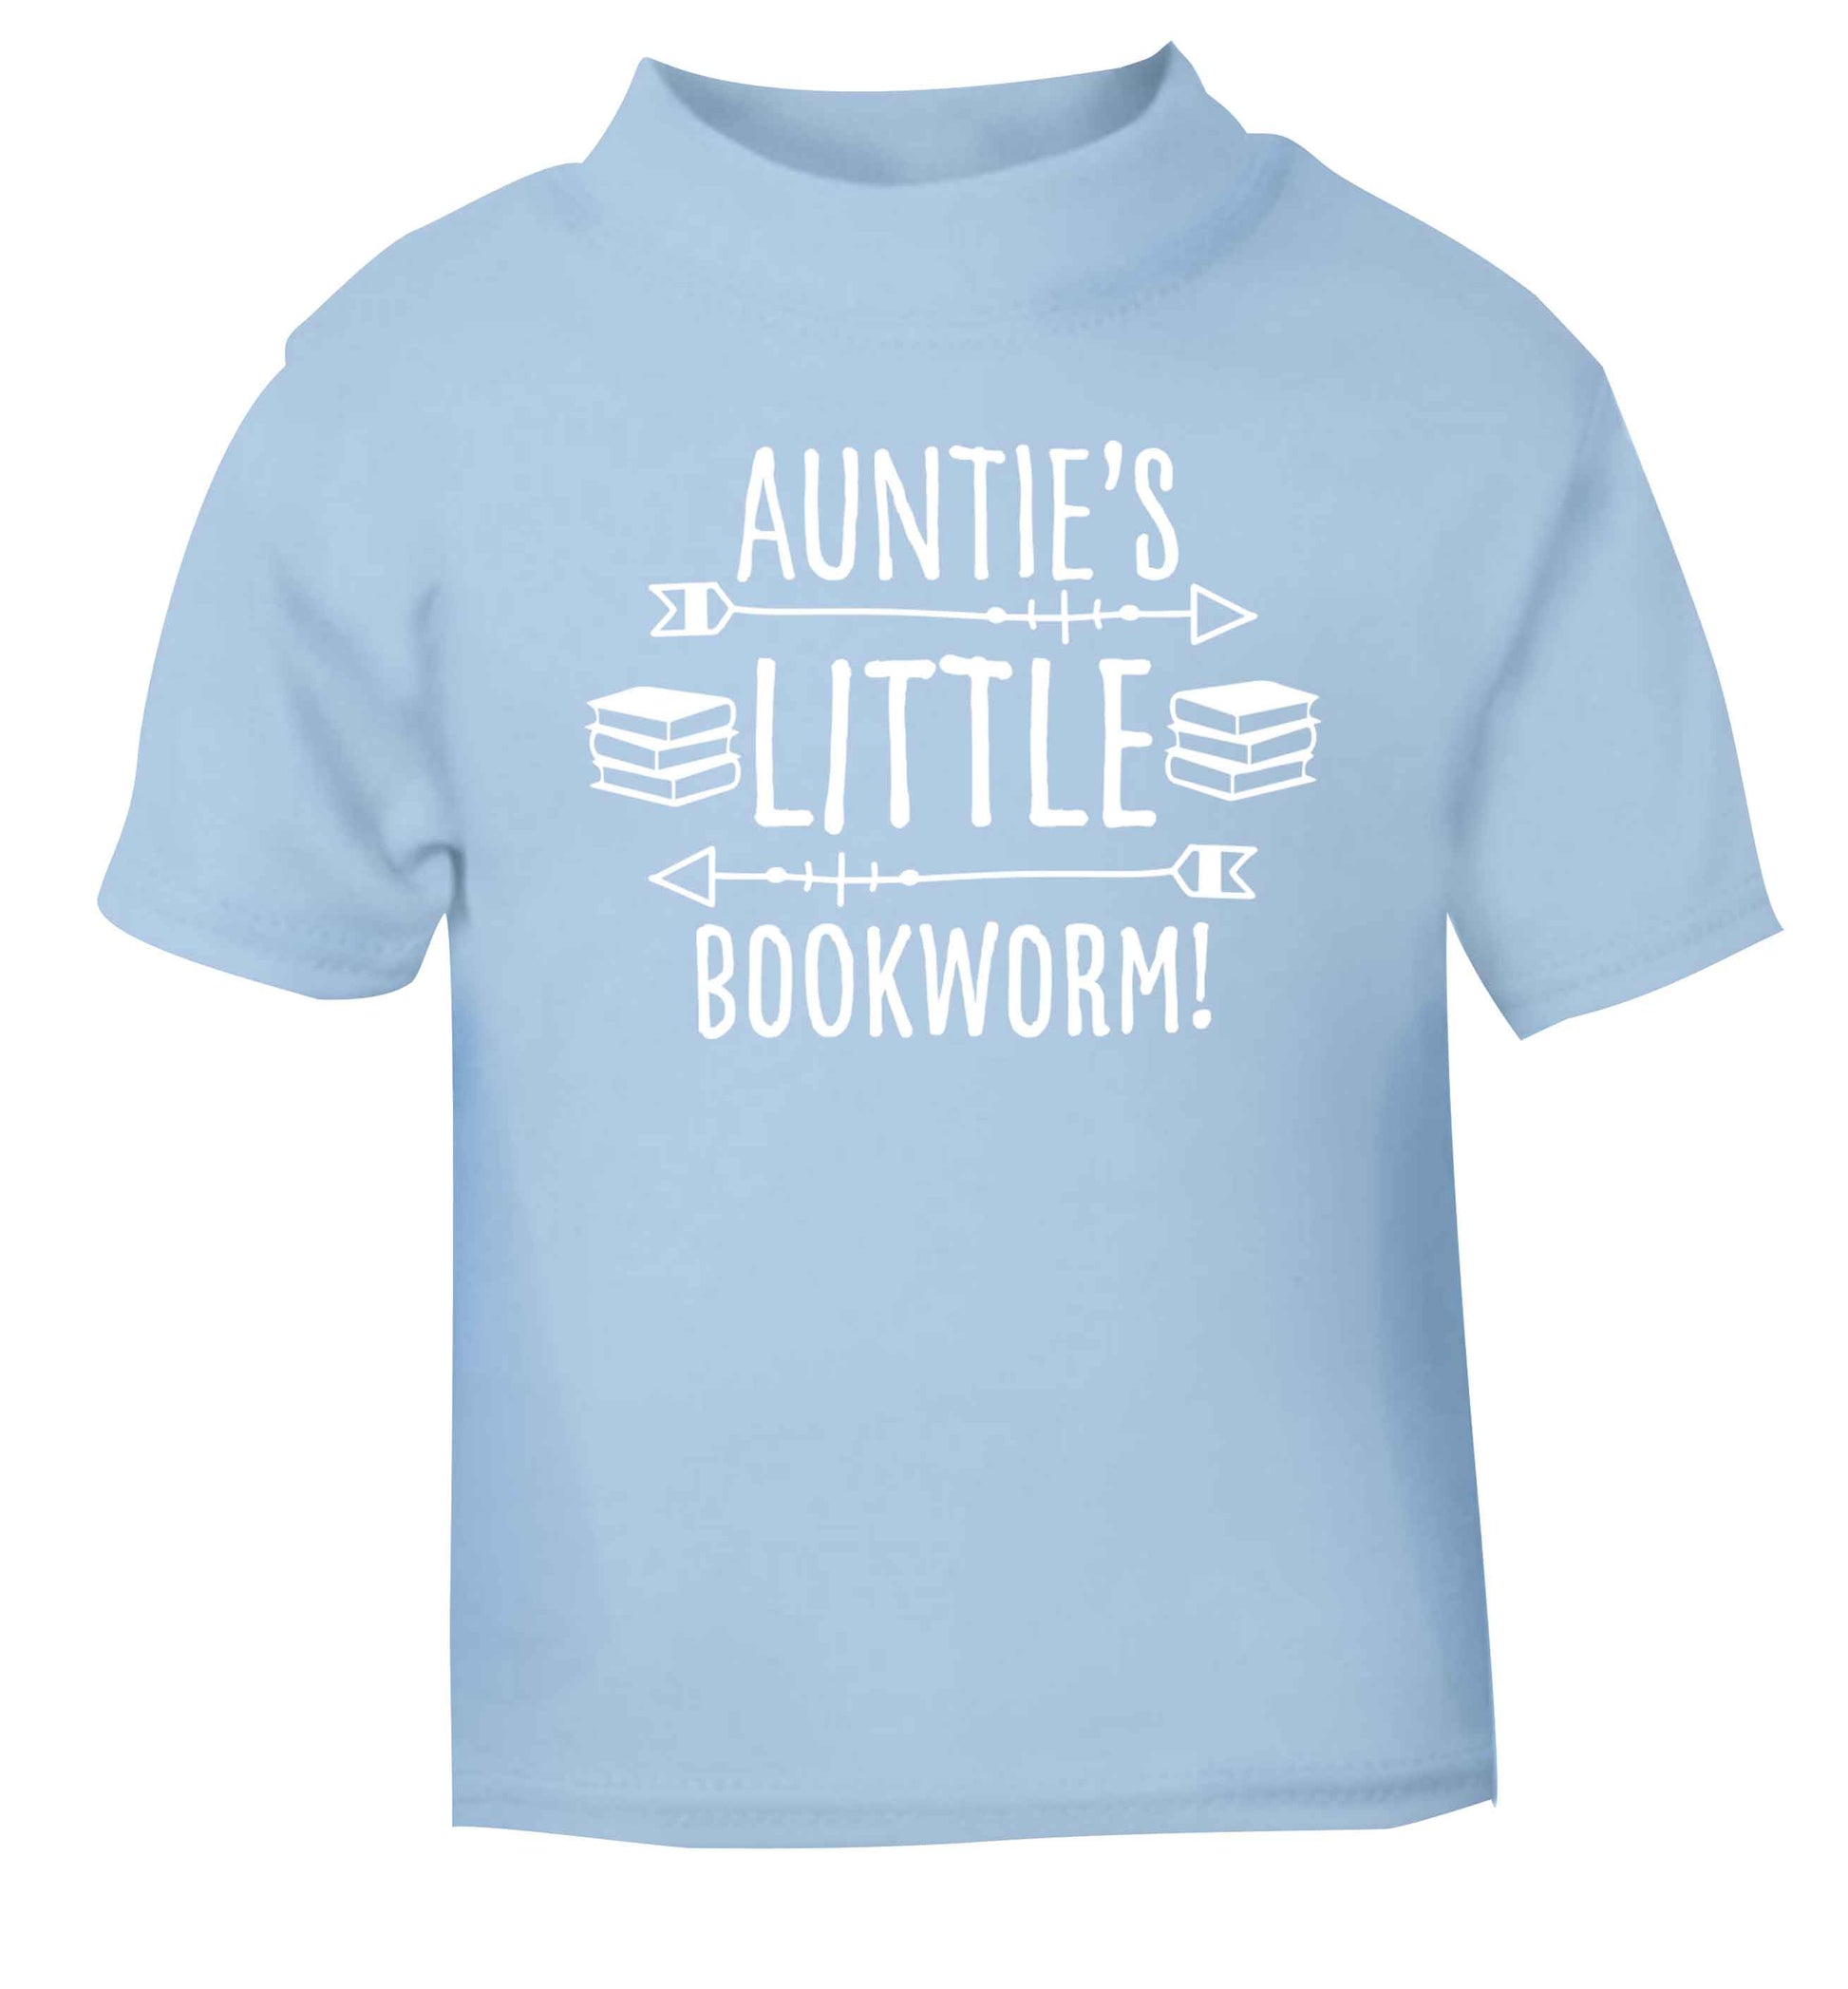 Auntie's little bookworm light blue baby toddler Tshirt 2 Years